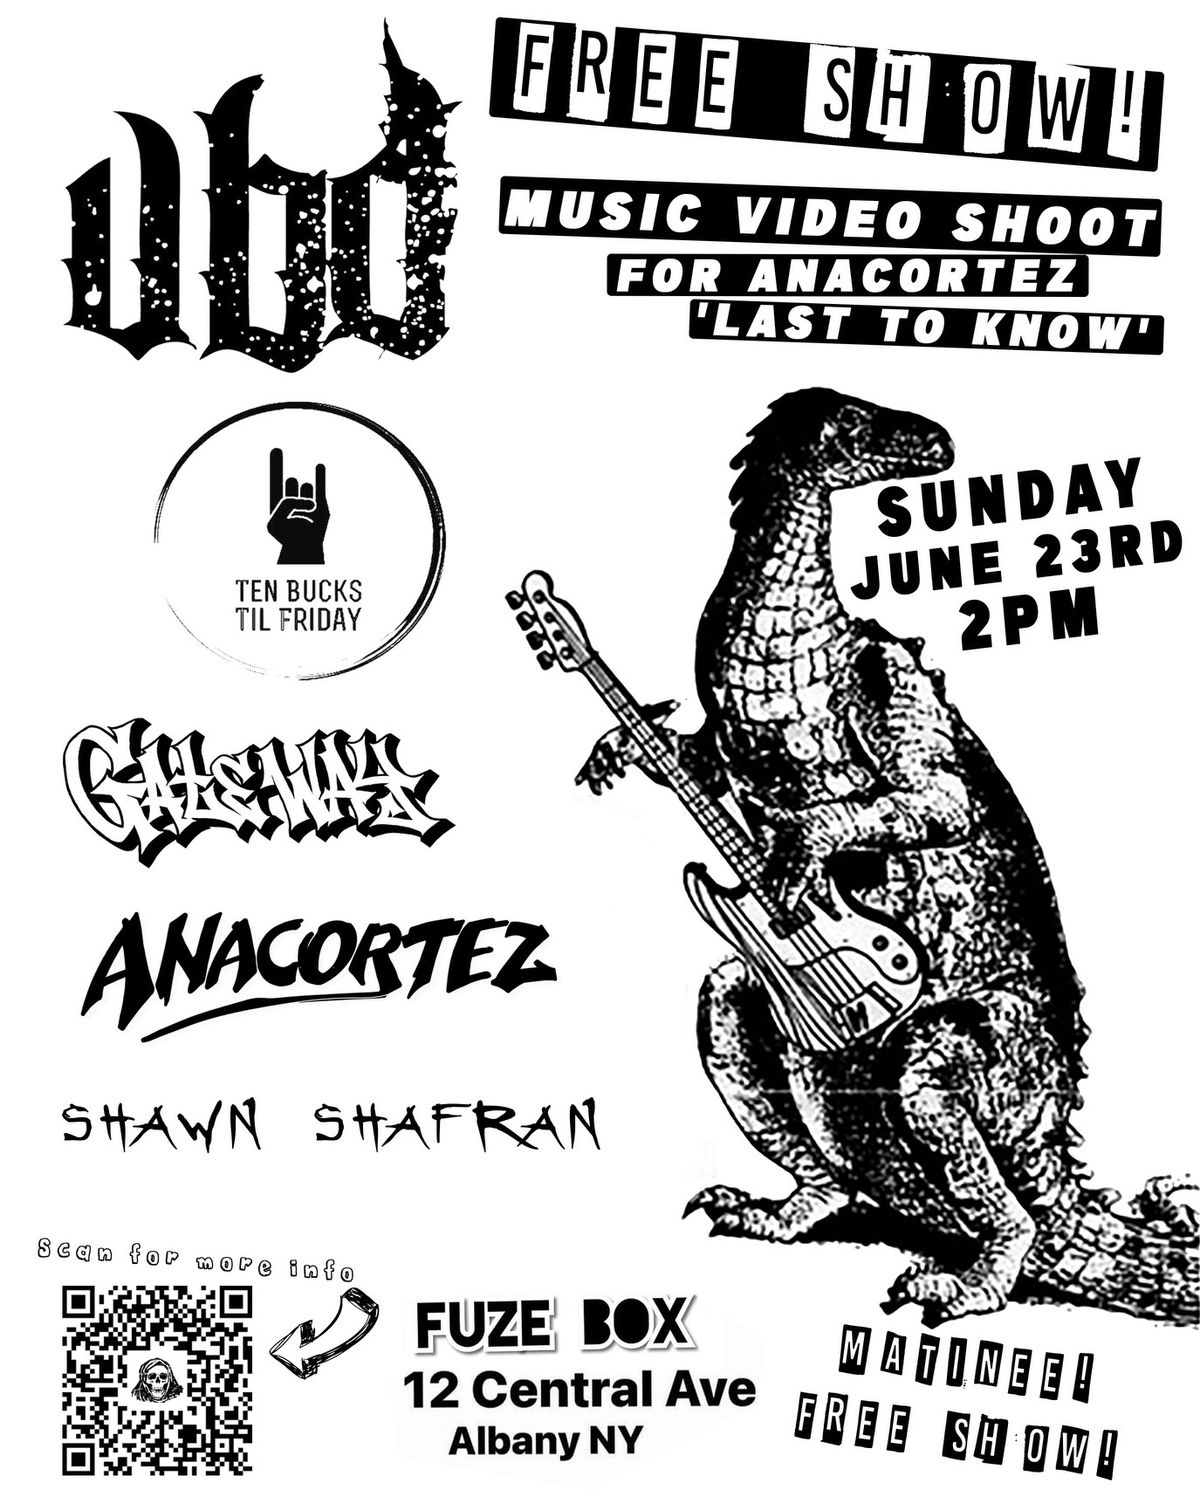 FREE SHOW AND MUSIC VIDEO SHOOT